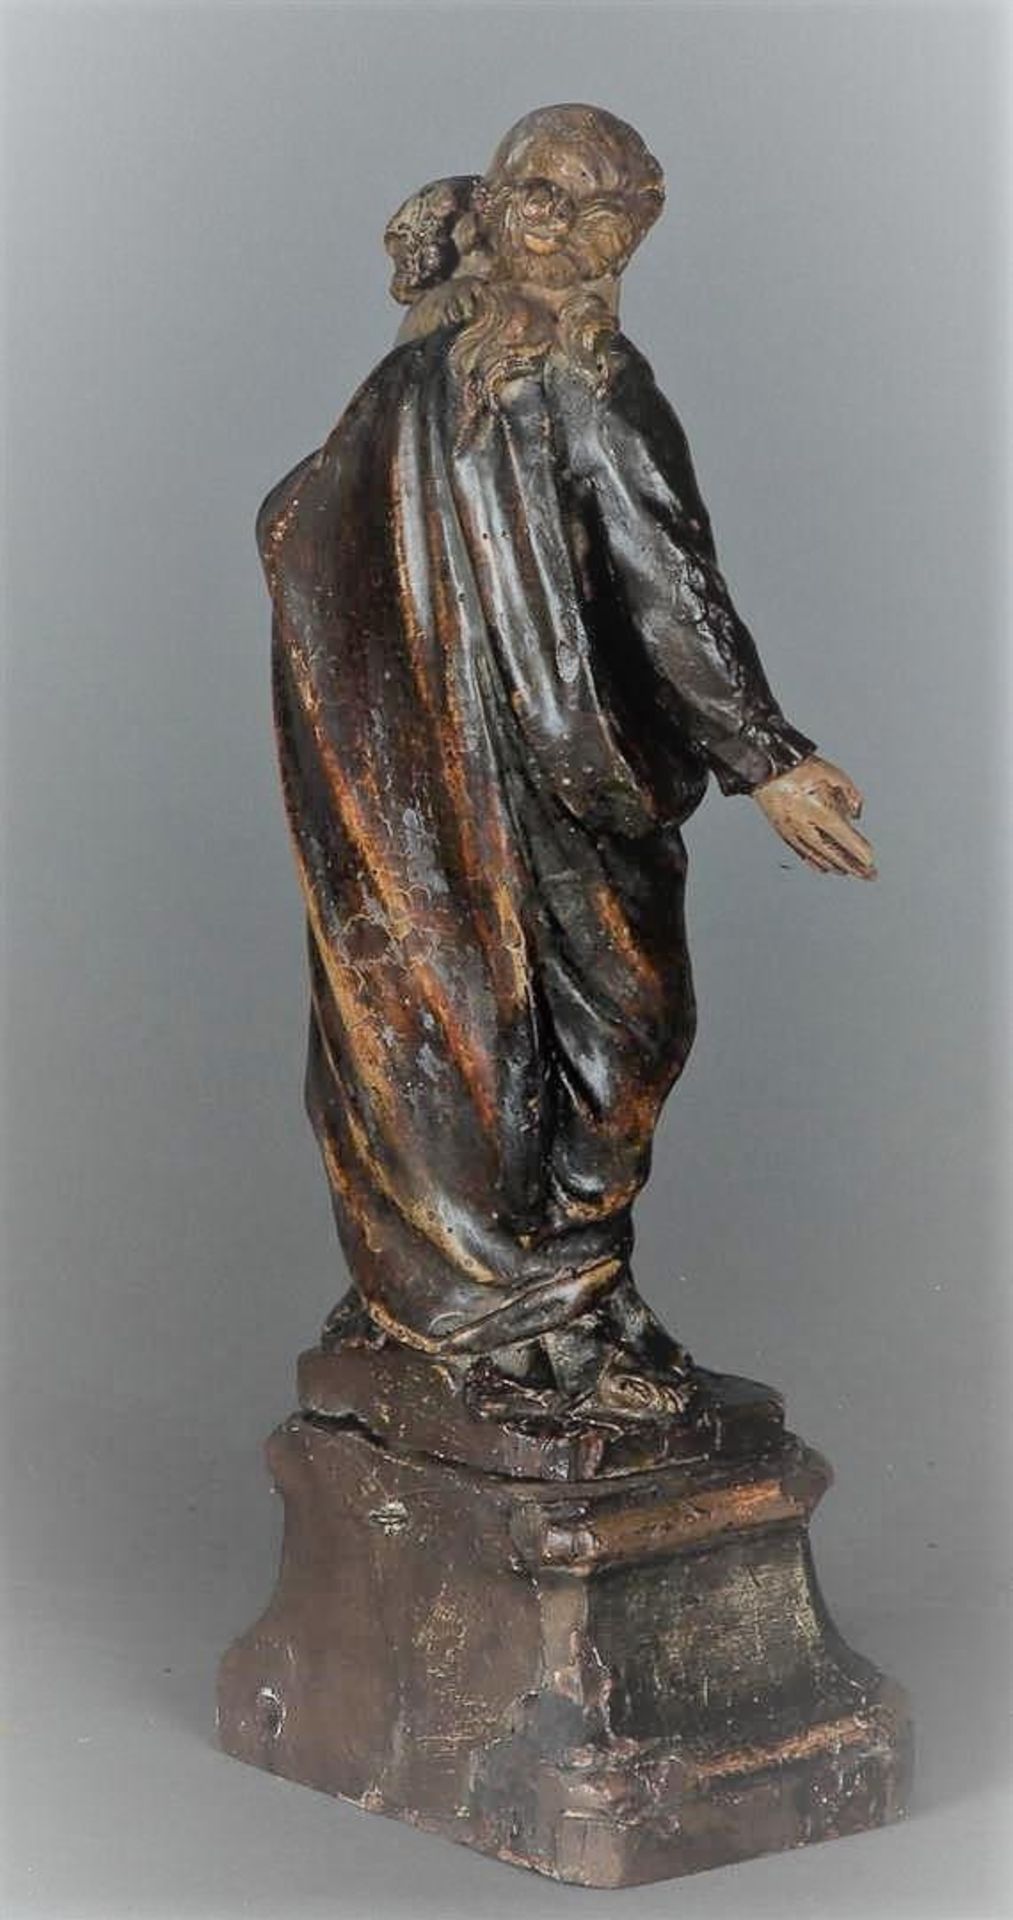 A wooden polychrome statue, Madonna with child. Possibly Antwerp 17th/18th century. - Image 2 of 3